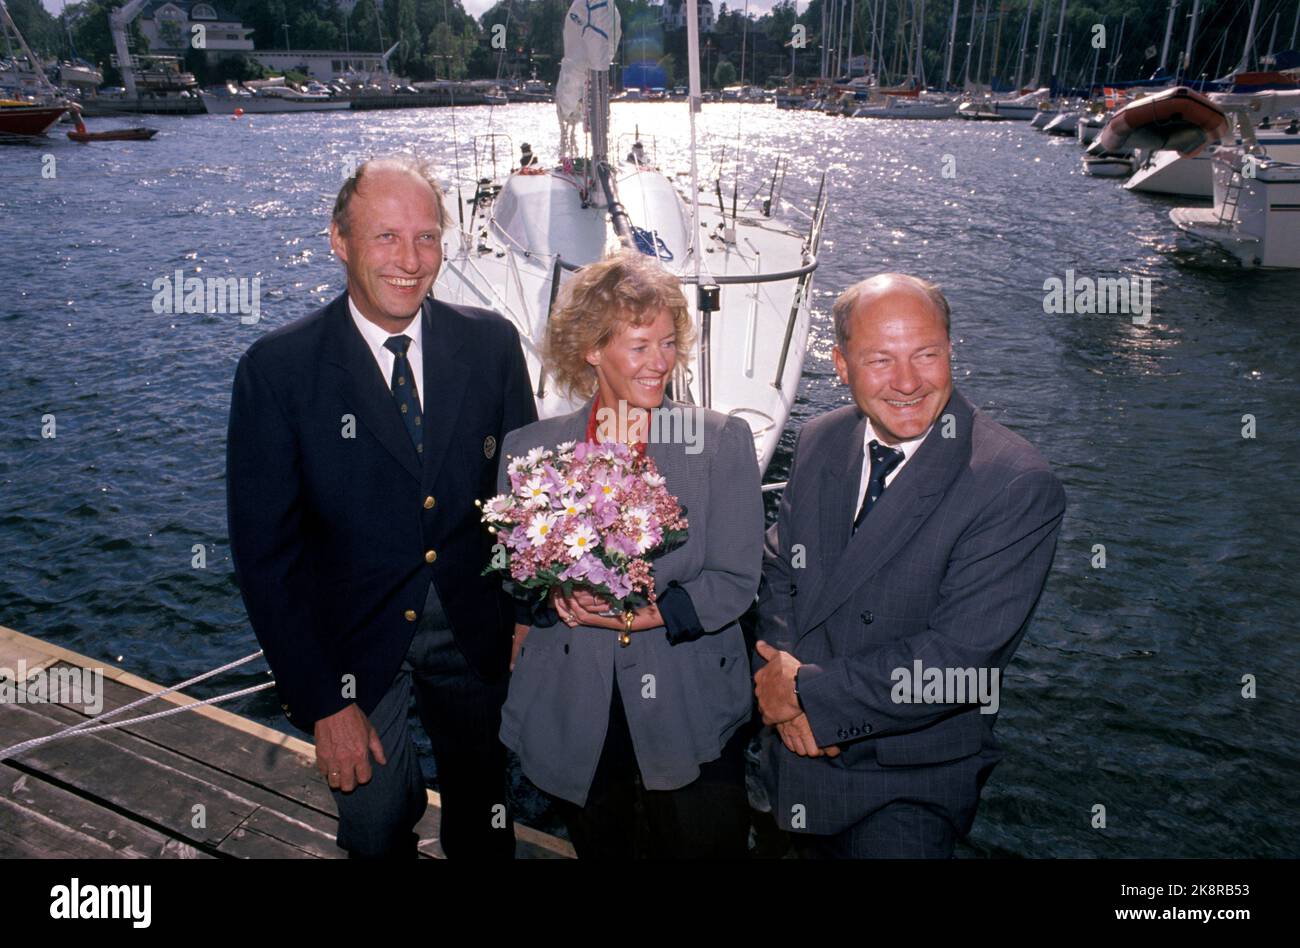 Oslo 19890608 The sailboat 'Fram XI' is baptized by Else Sundt. On Thursday, Crown Prince Harald's new Entonner 'Fram XI' was baptized at the Queen in Oslo. It was Else Sundt, shipowner Petter C.G. Healthy Wife, who became the godmother of the boat after she crushed the champagne bottle against the ship's side. It was no coincidence that it was precisely her who got the honor. It's Petter C.G. Sundt who has funded the new regatta machine. Only the boat has cost NOK 2.1 million. From V: Crown Prince Harald, Else Sundt and Petter Sundt. Photo: Olav Olsen / NTB Stock Photo